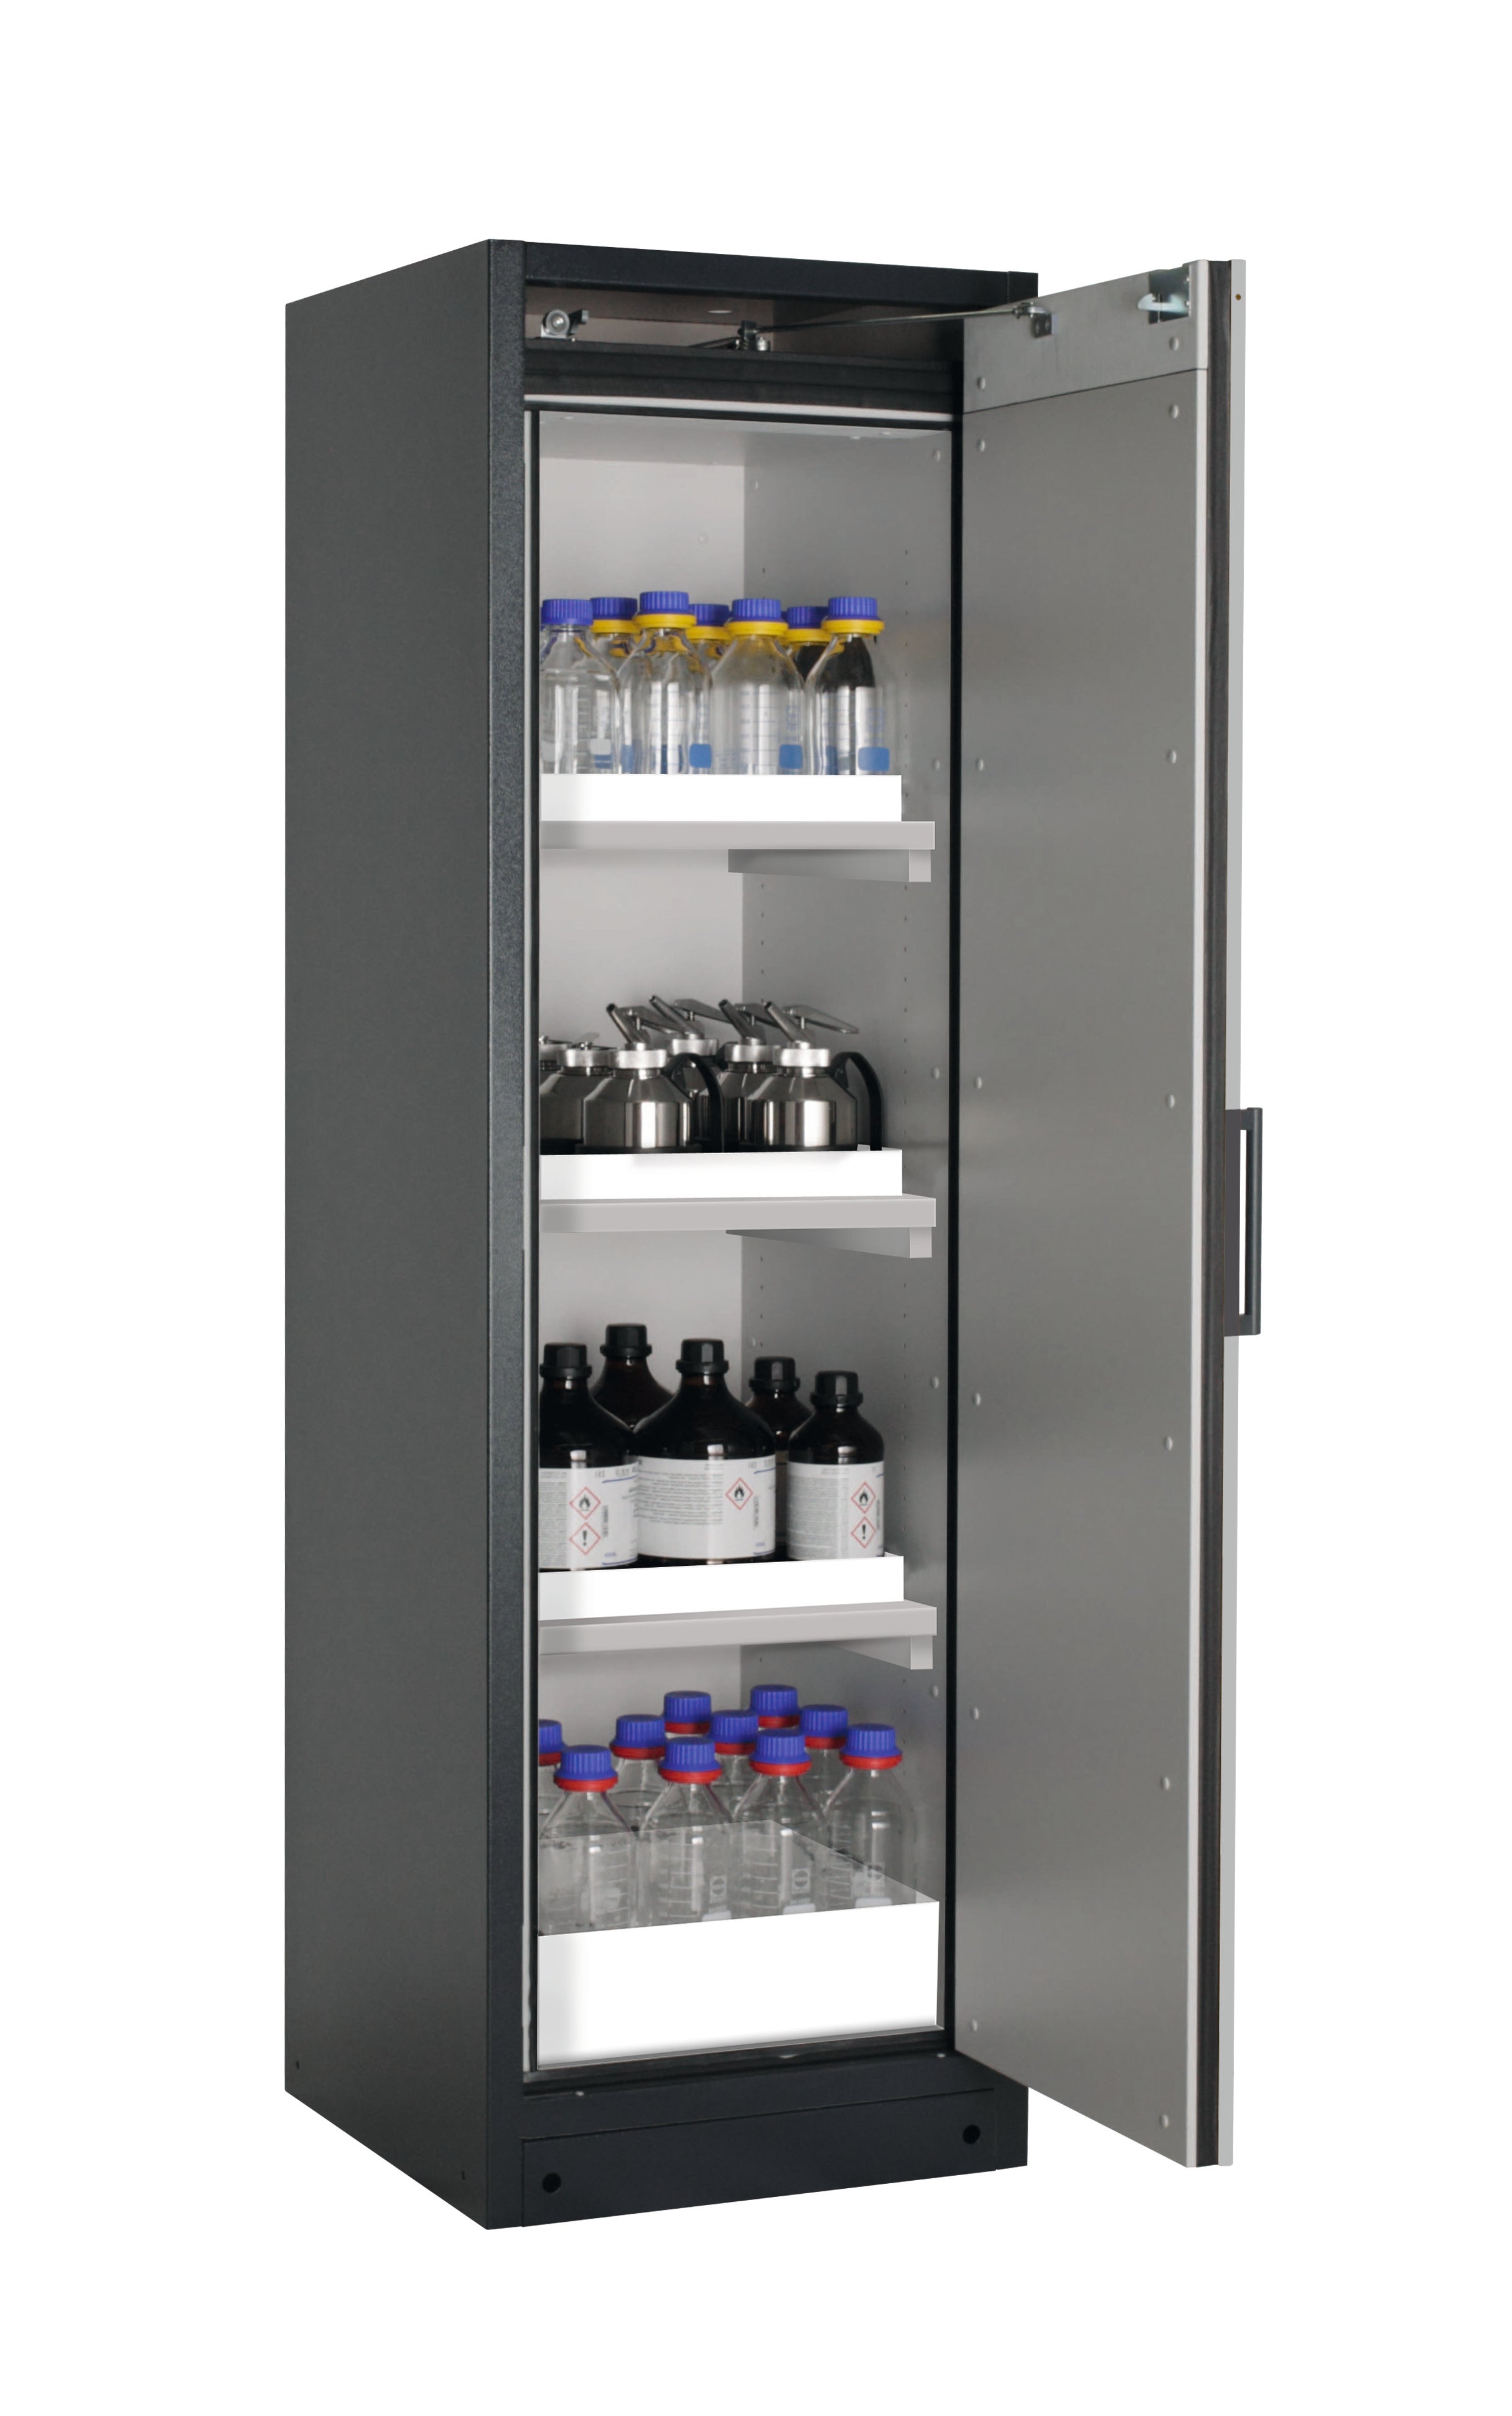 Type 90 safety storage cabinet Q-CLASSIC-90 model Q90.195.060.R in pure white RAL 9010 with 3x tray shelf (standard) (polypropylene),